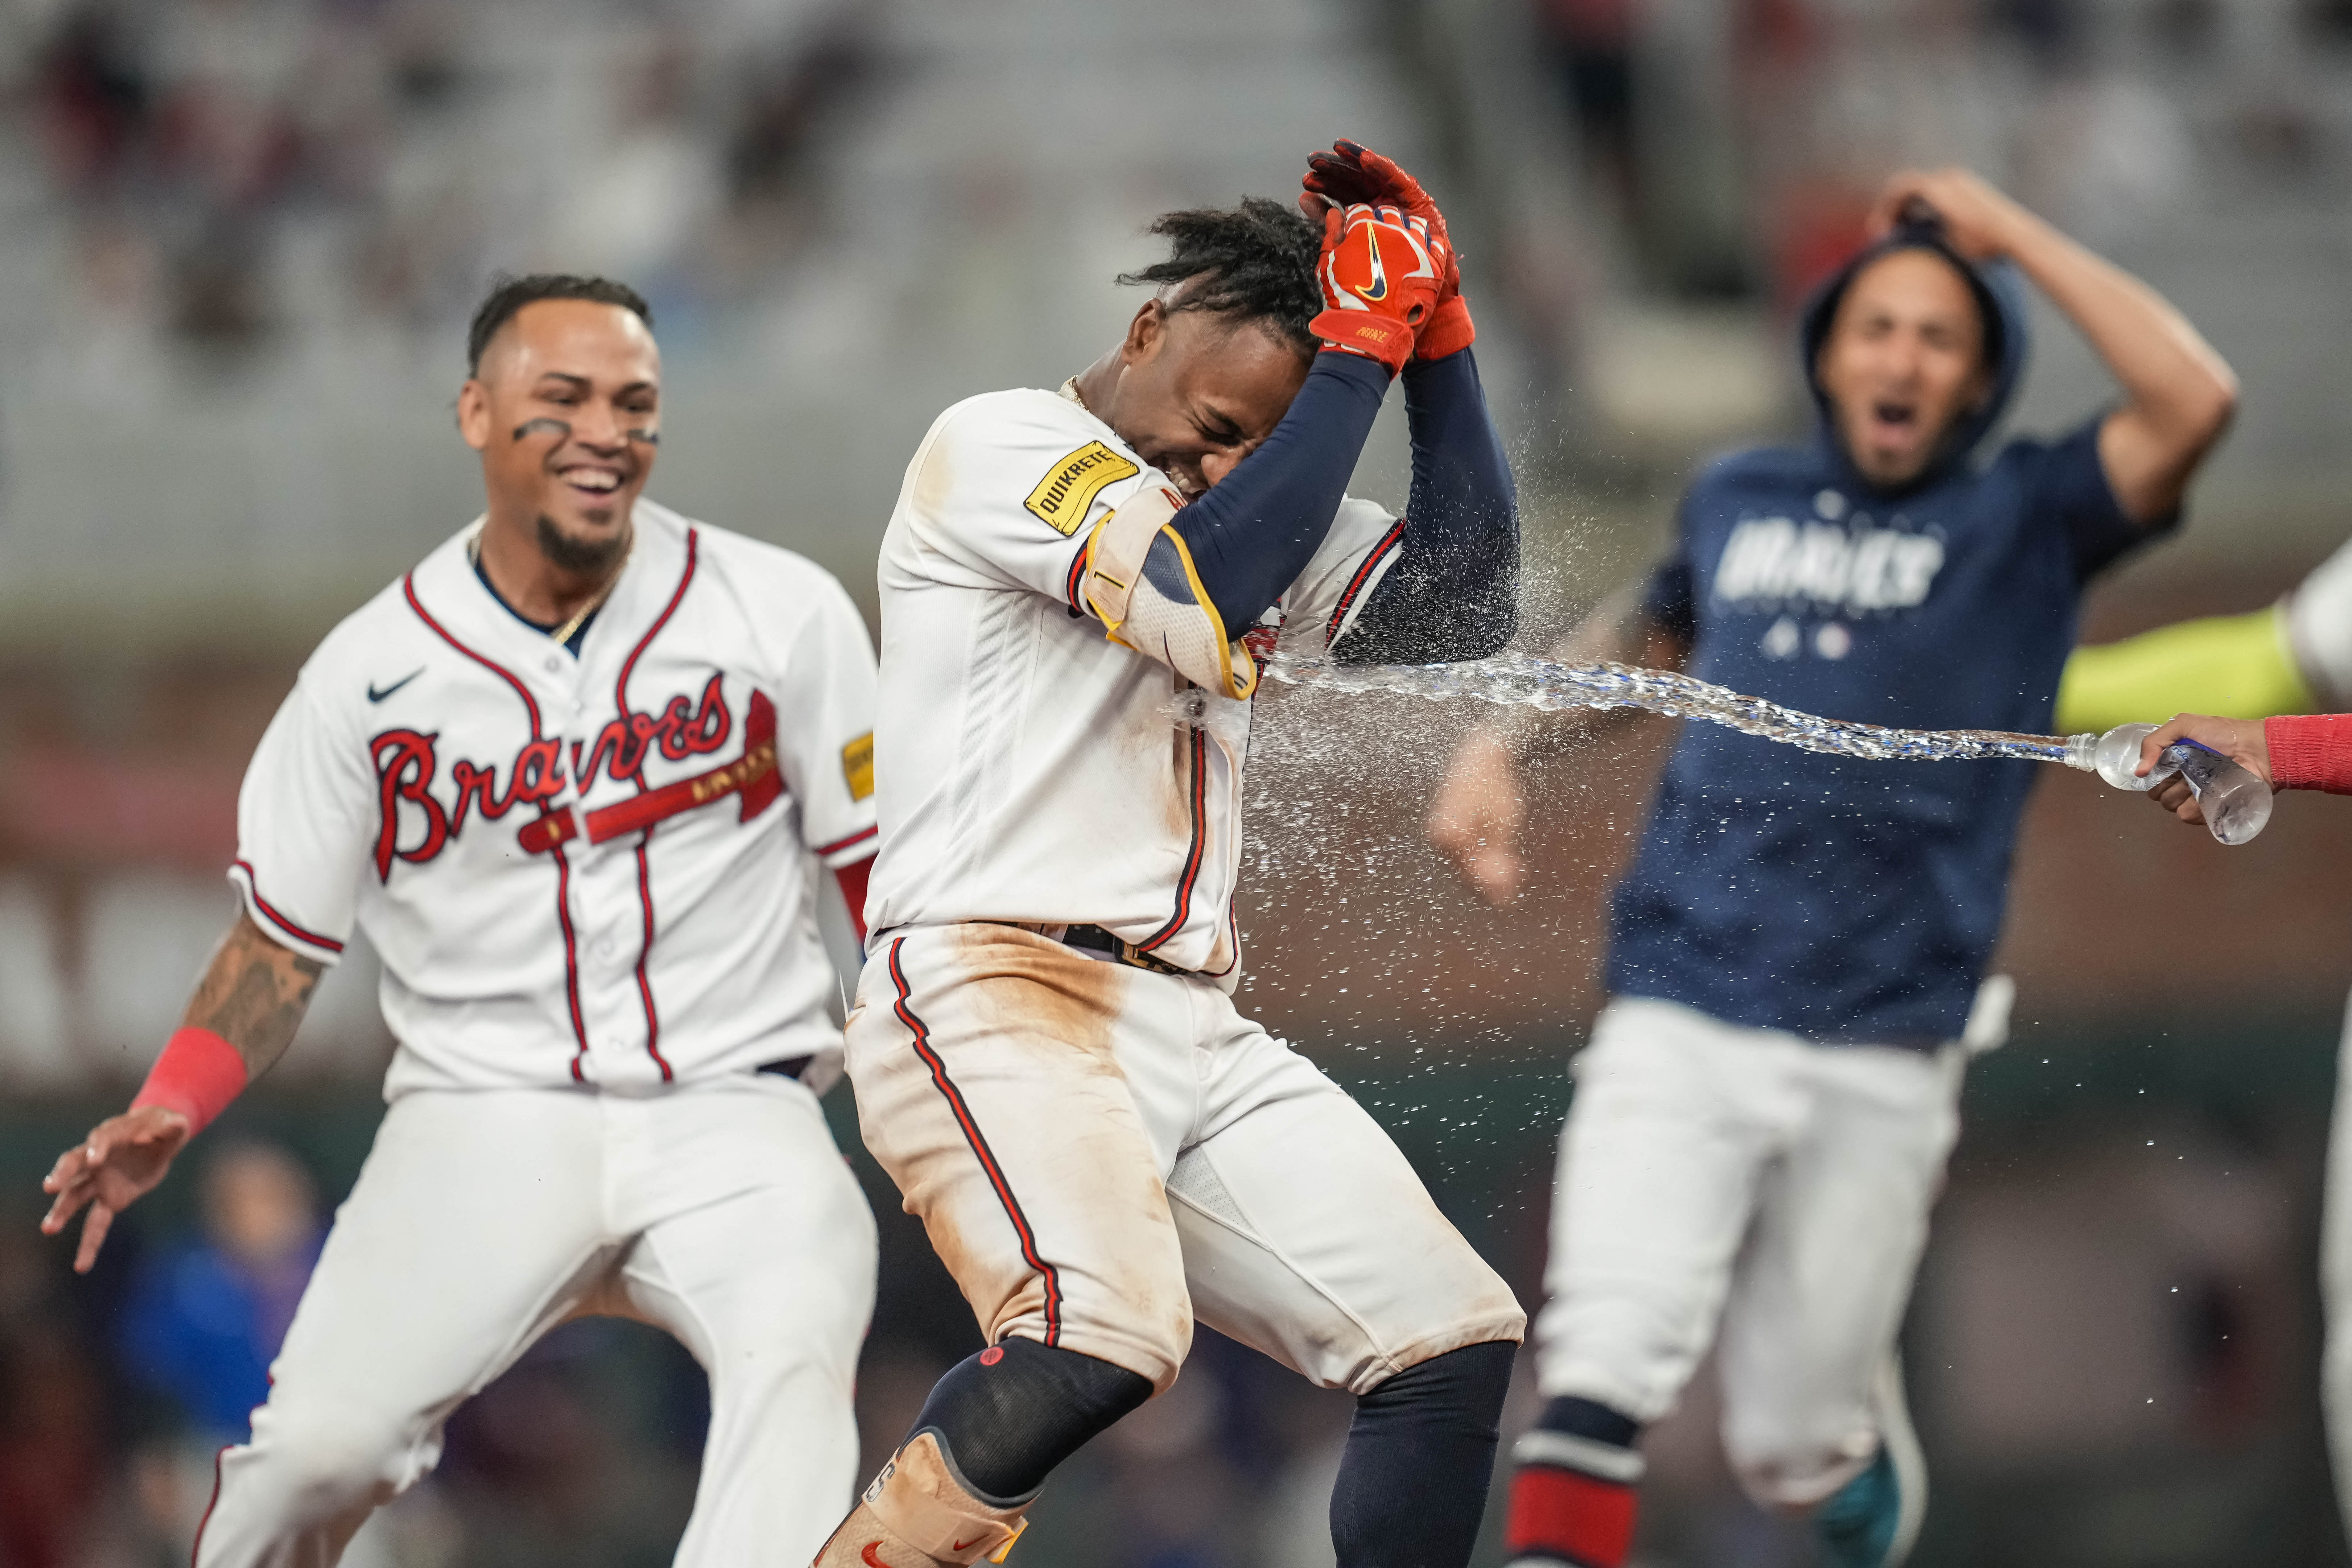 Braves beat Cubs, 5-3, to clinch home-field advantage throughout